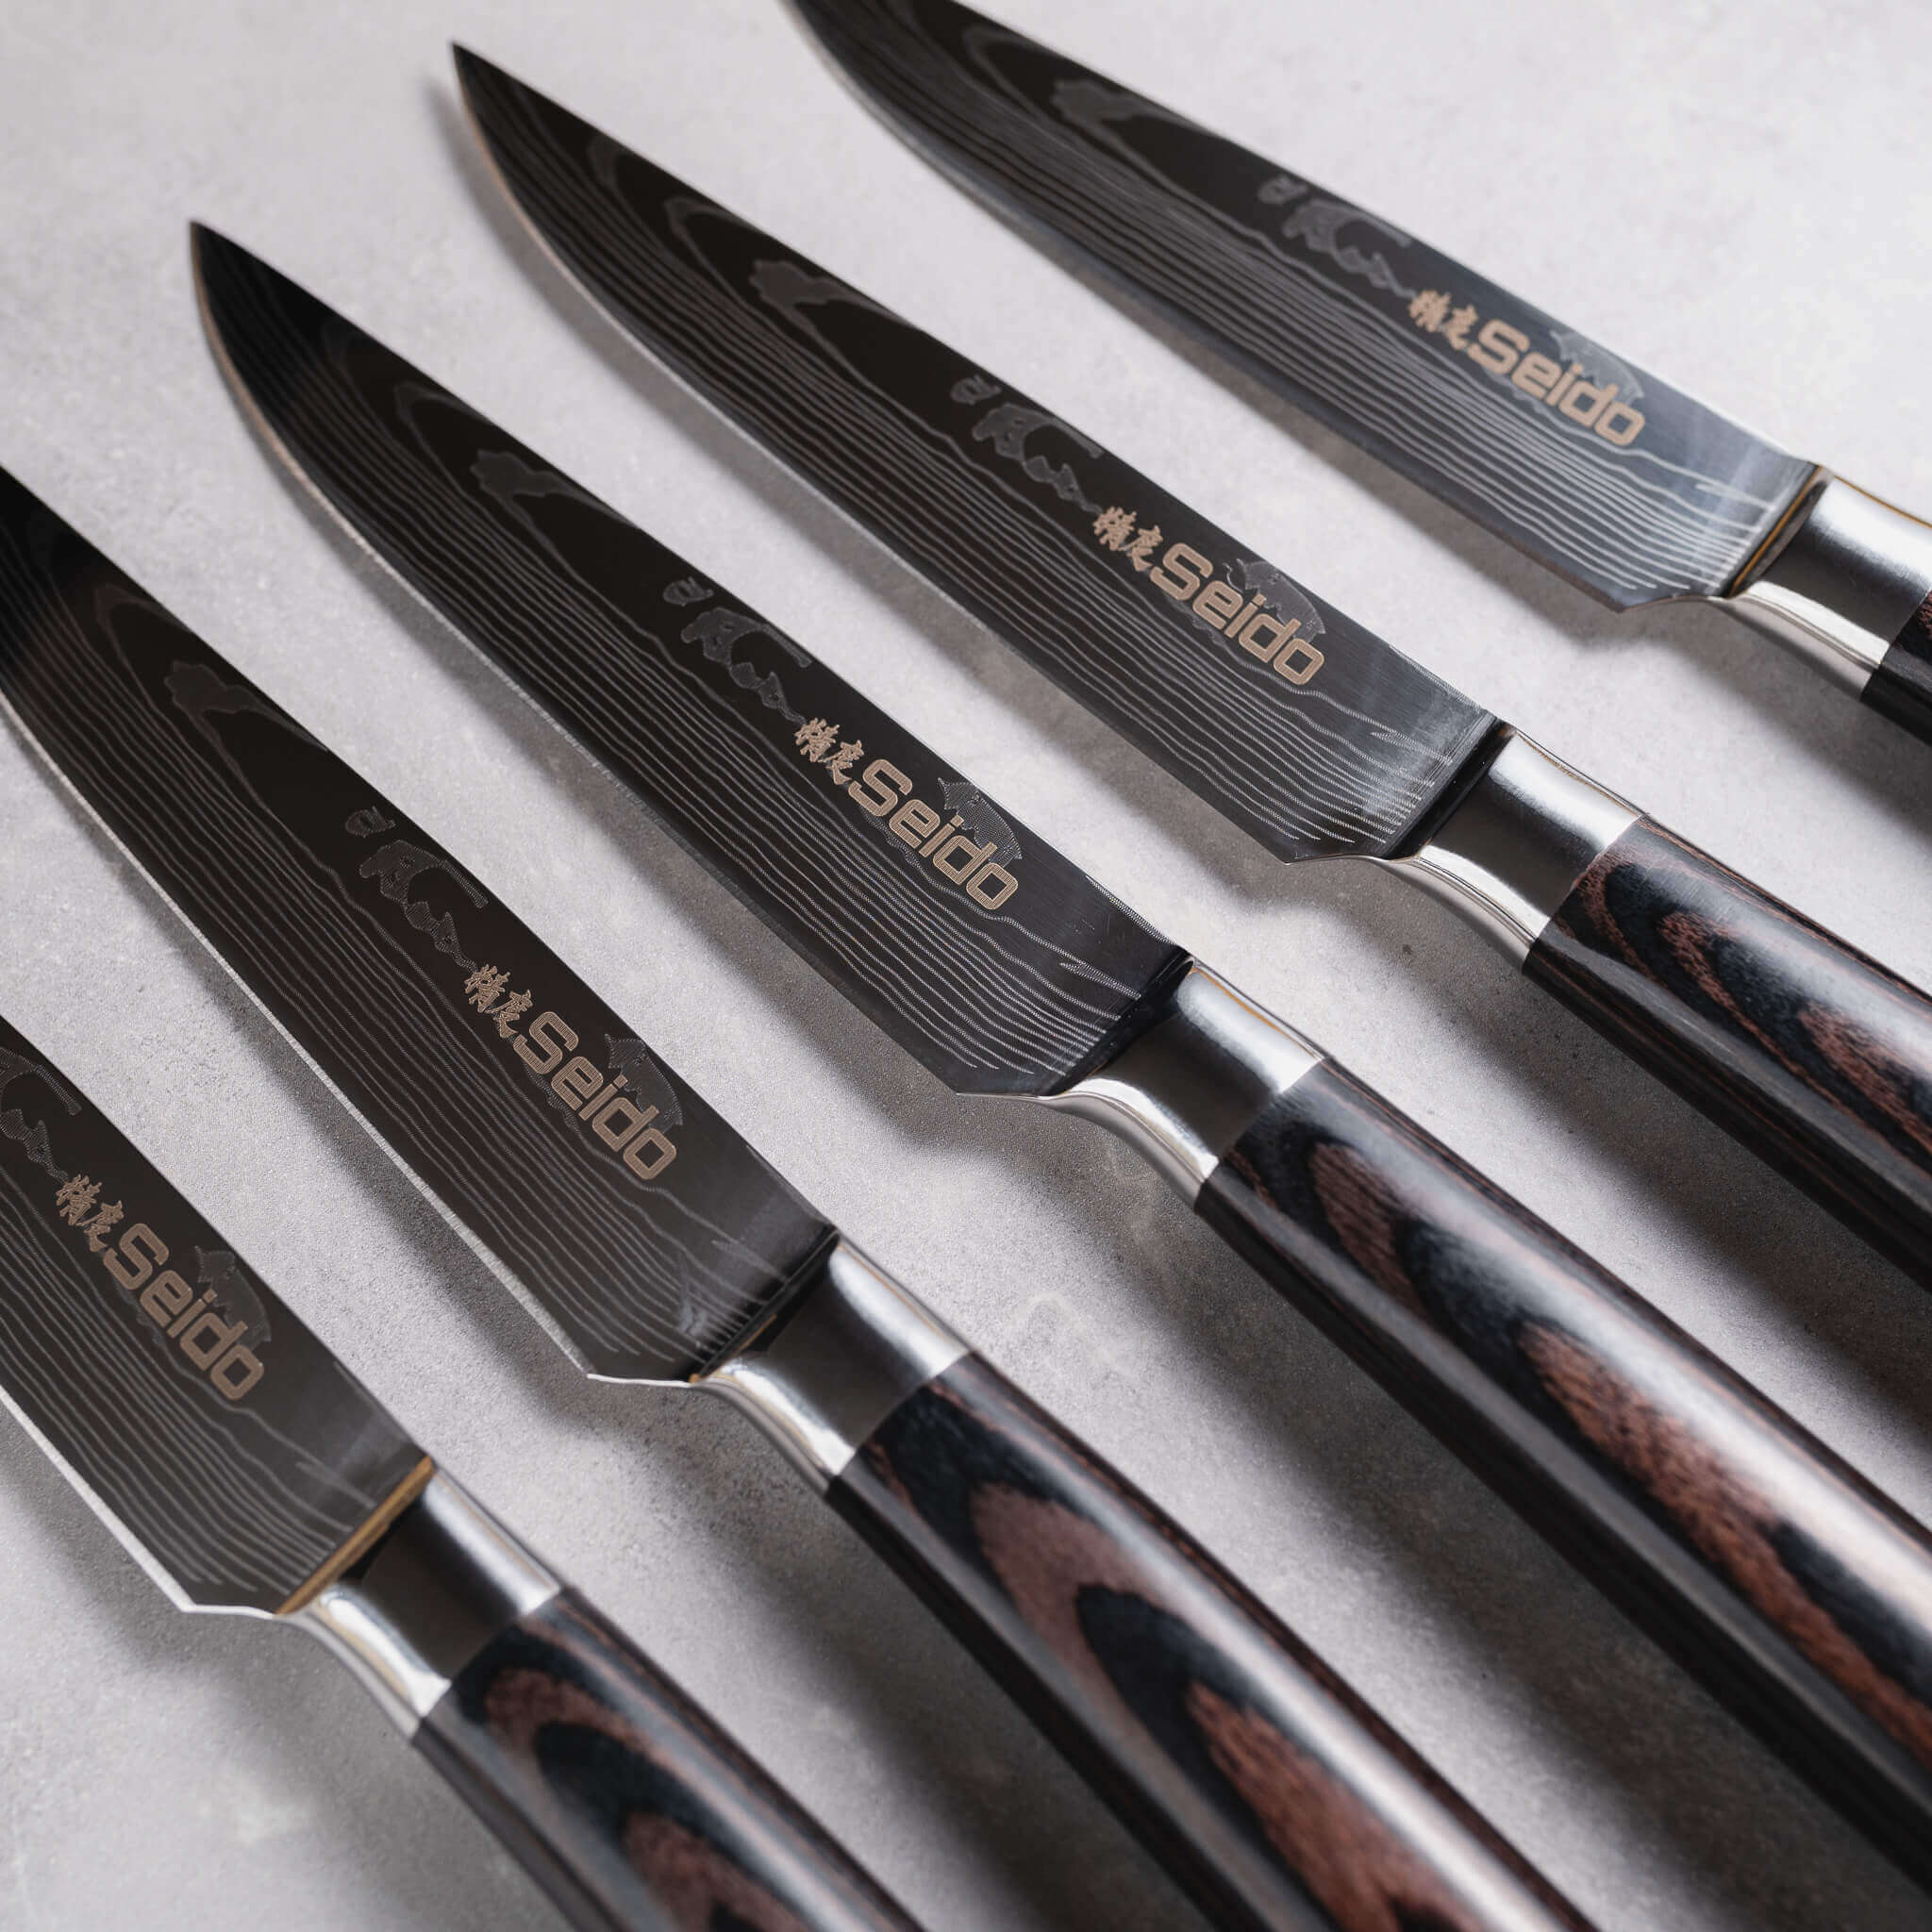 Seido Knives' sleek non-serrated Straight-Edge Steak Knives: perfect for a smooth and precise cut.